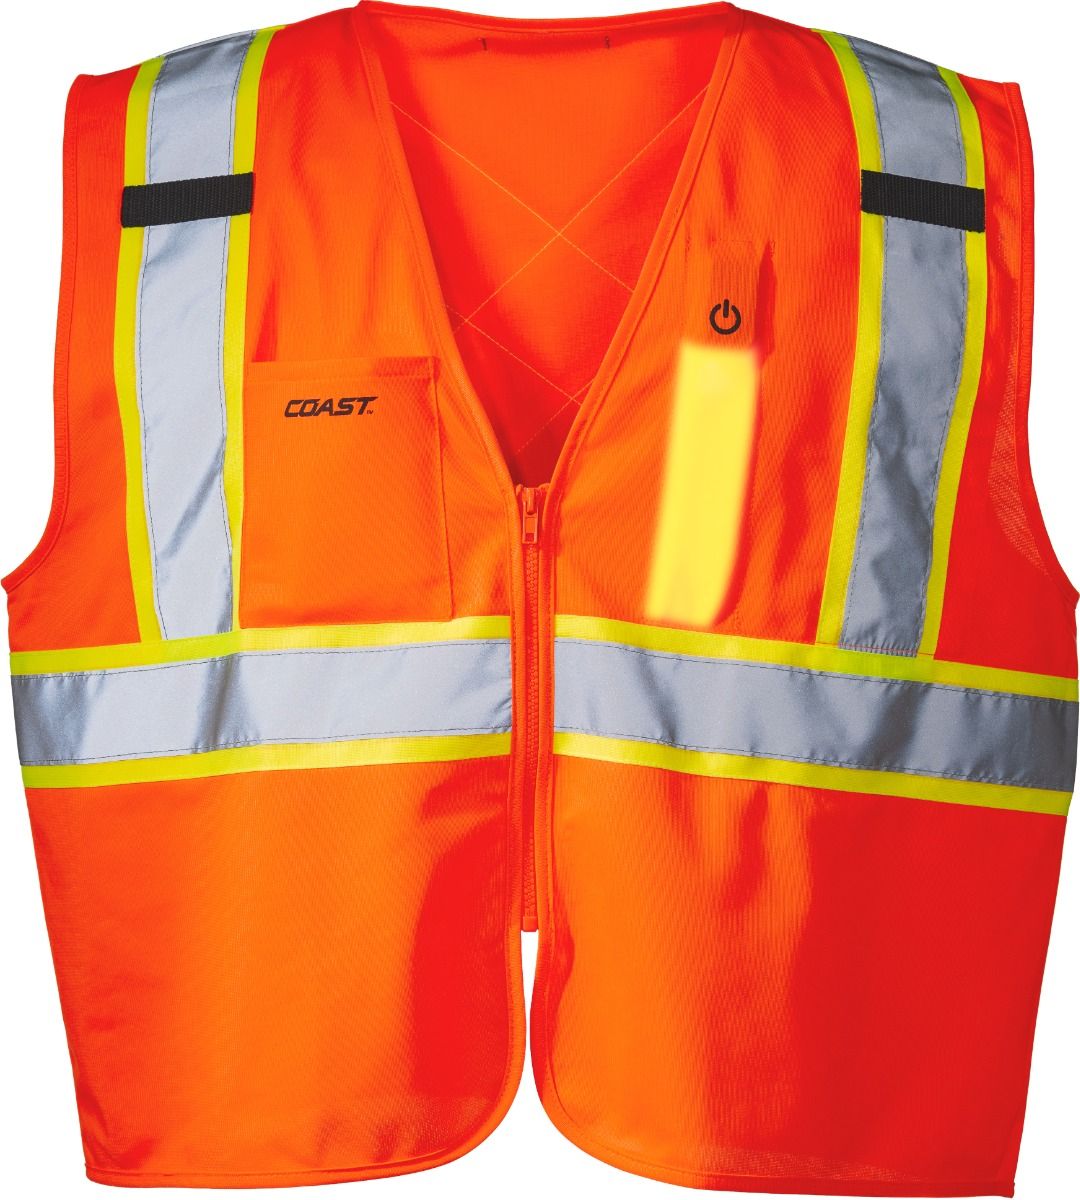 Coast SA300 Rechargeable Lighted LED High Visibility Safety